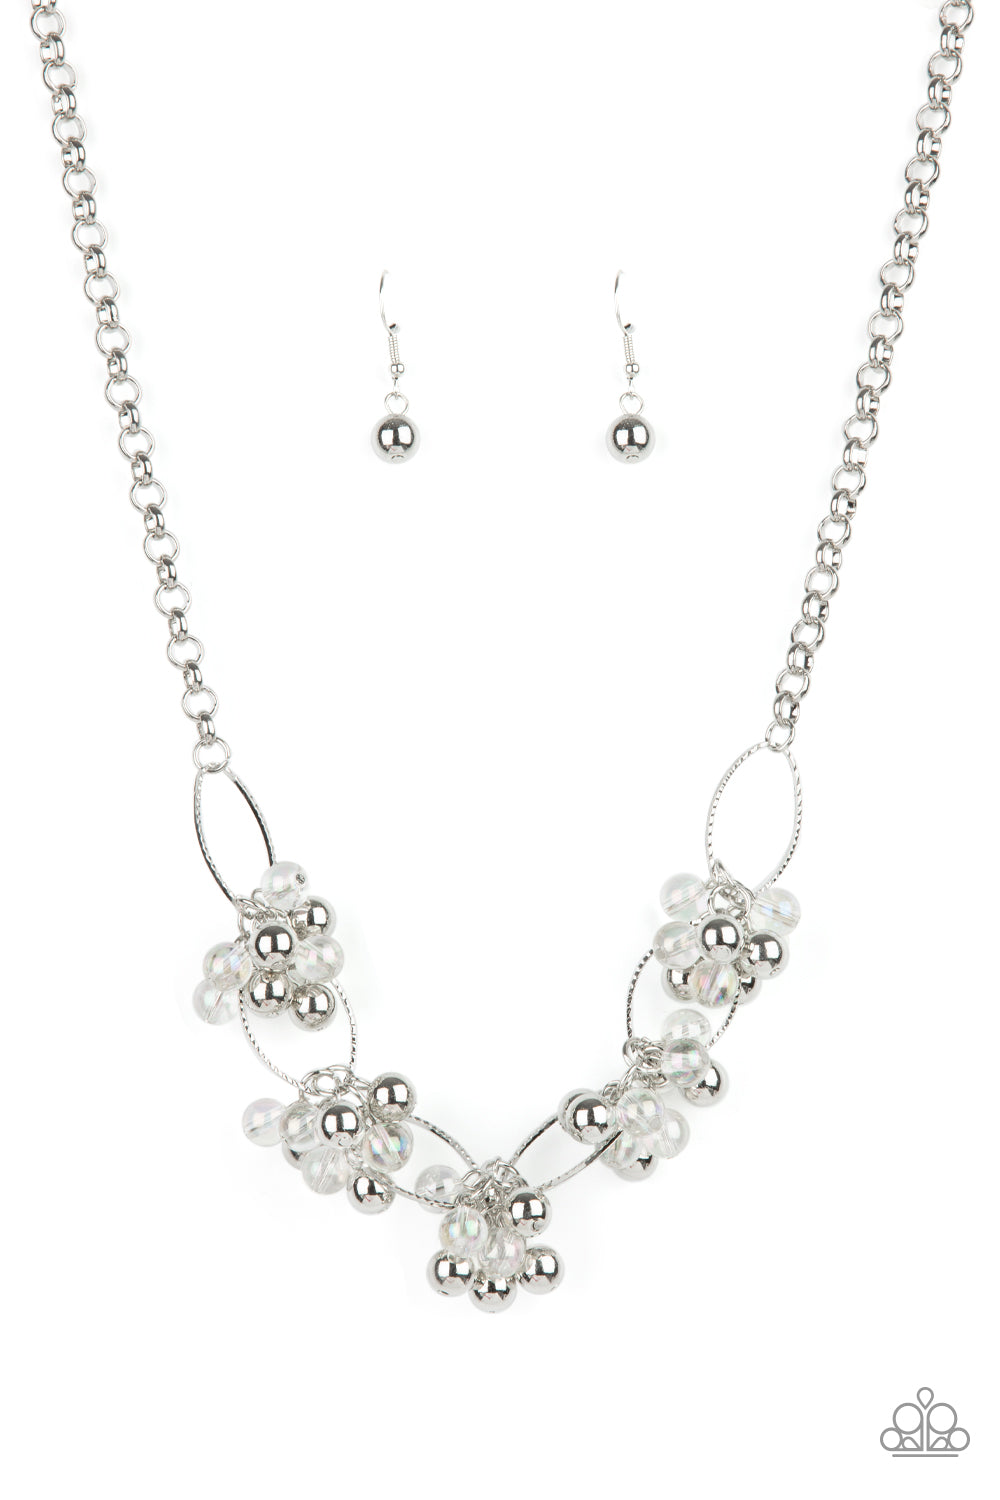 Paparazzi Life of the Party Exclusive Effervescent Ensemble - Multi Necklace